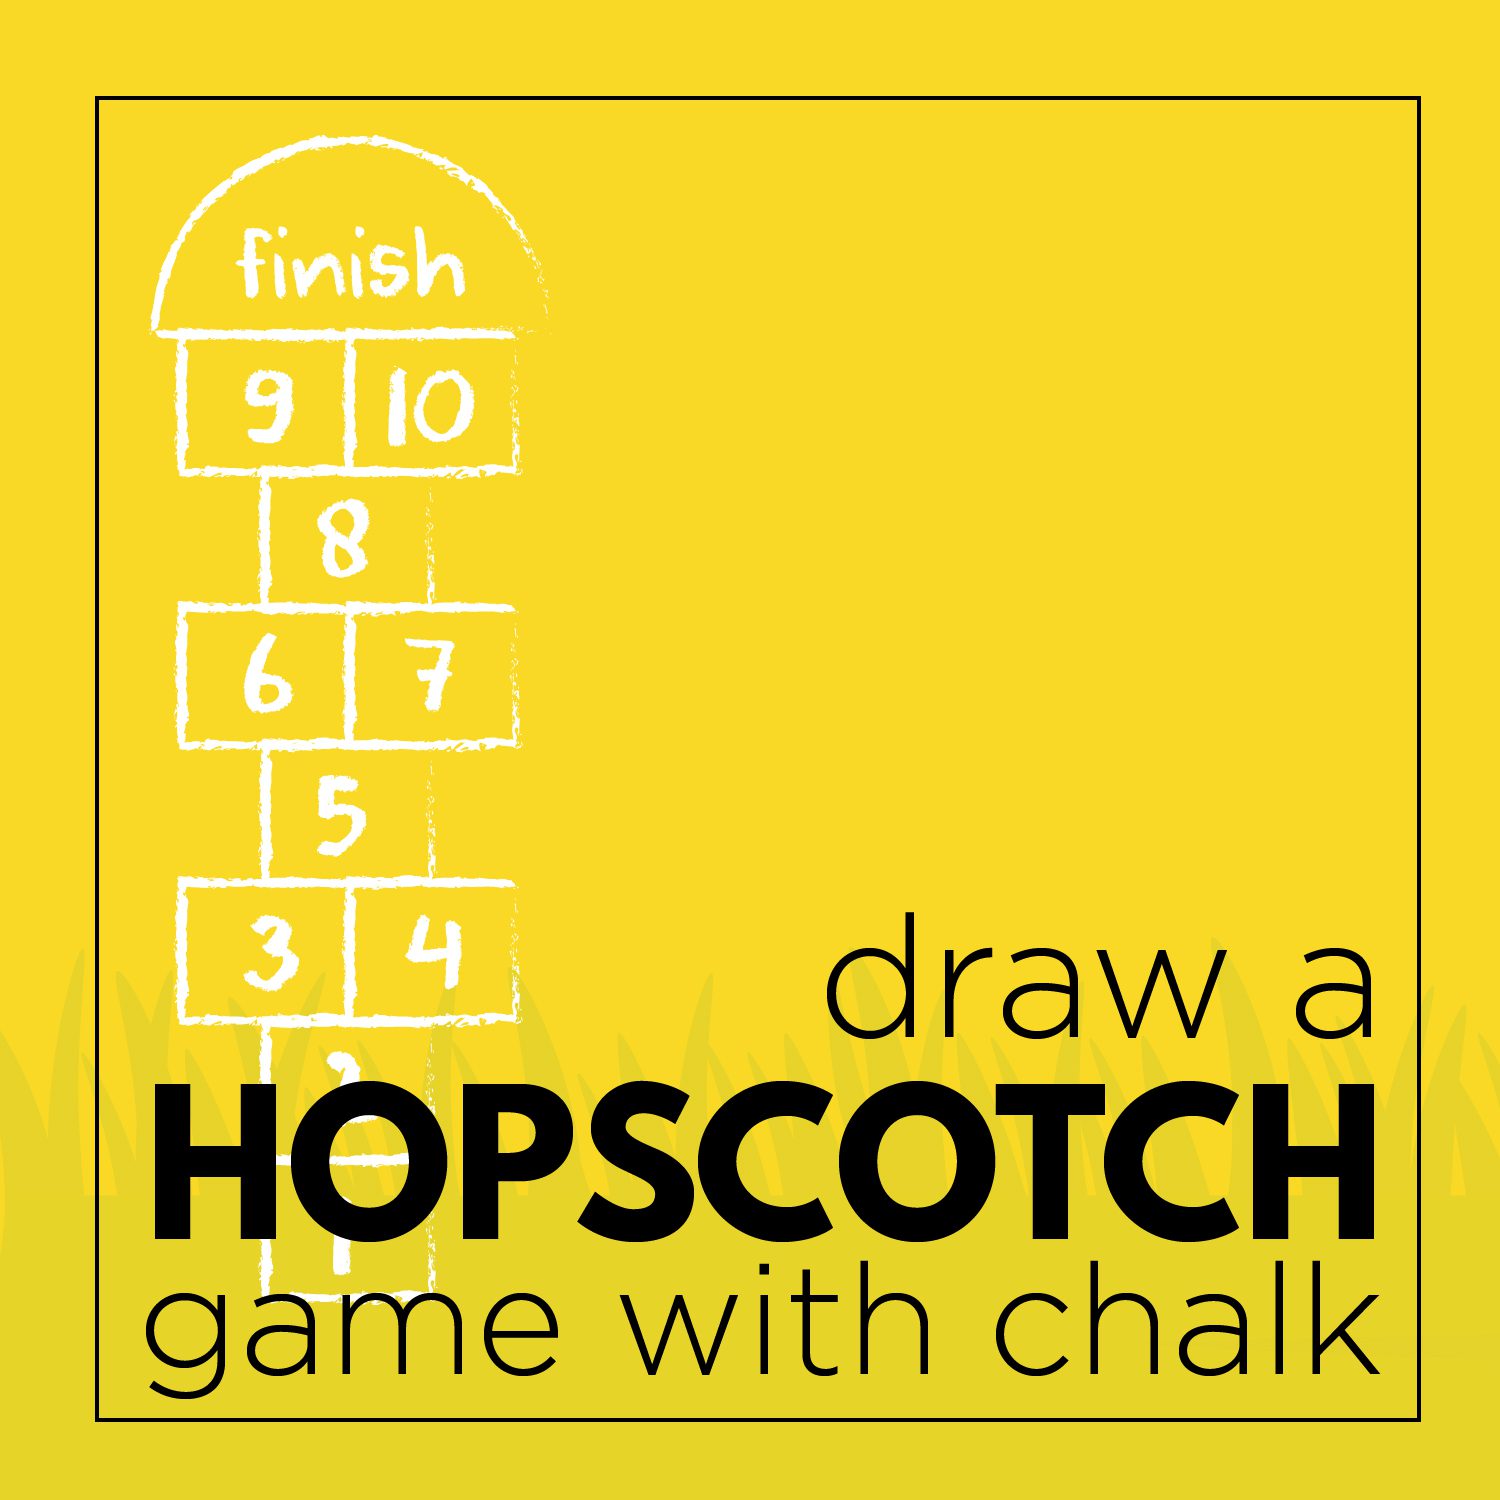 Draw a hopscotch game with chalk